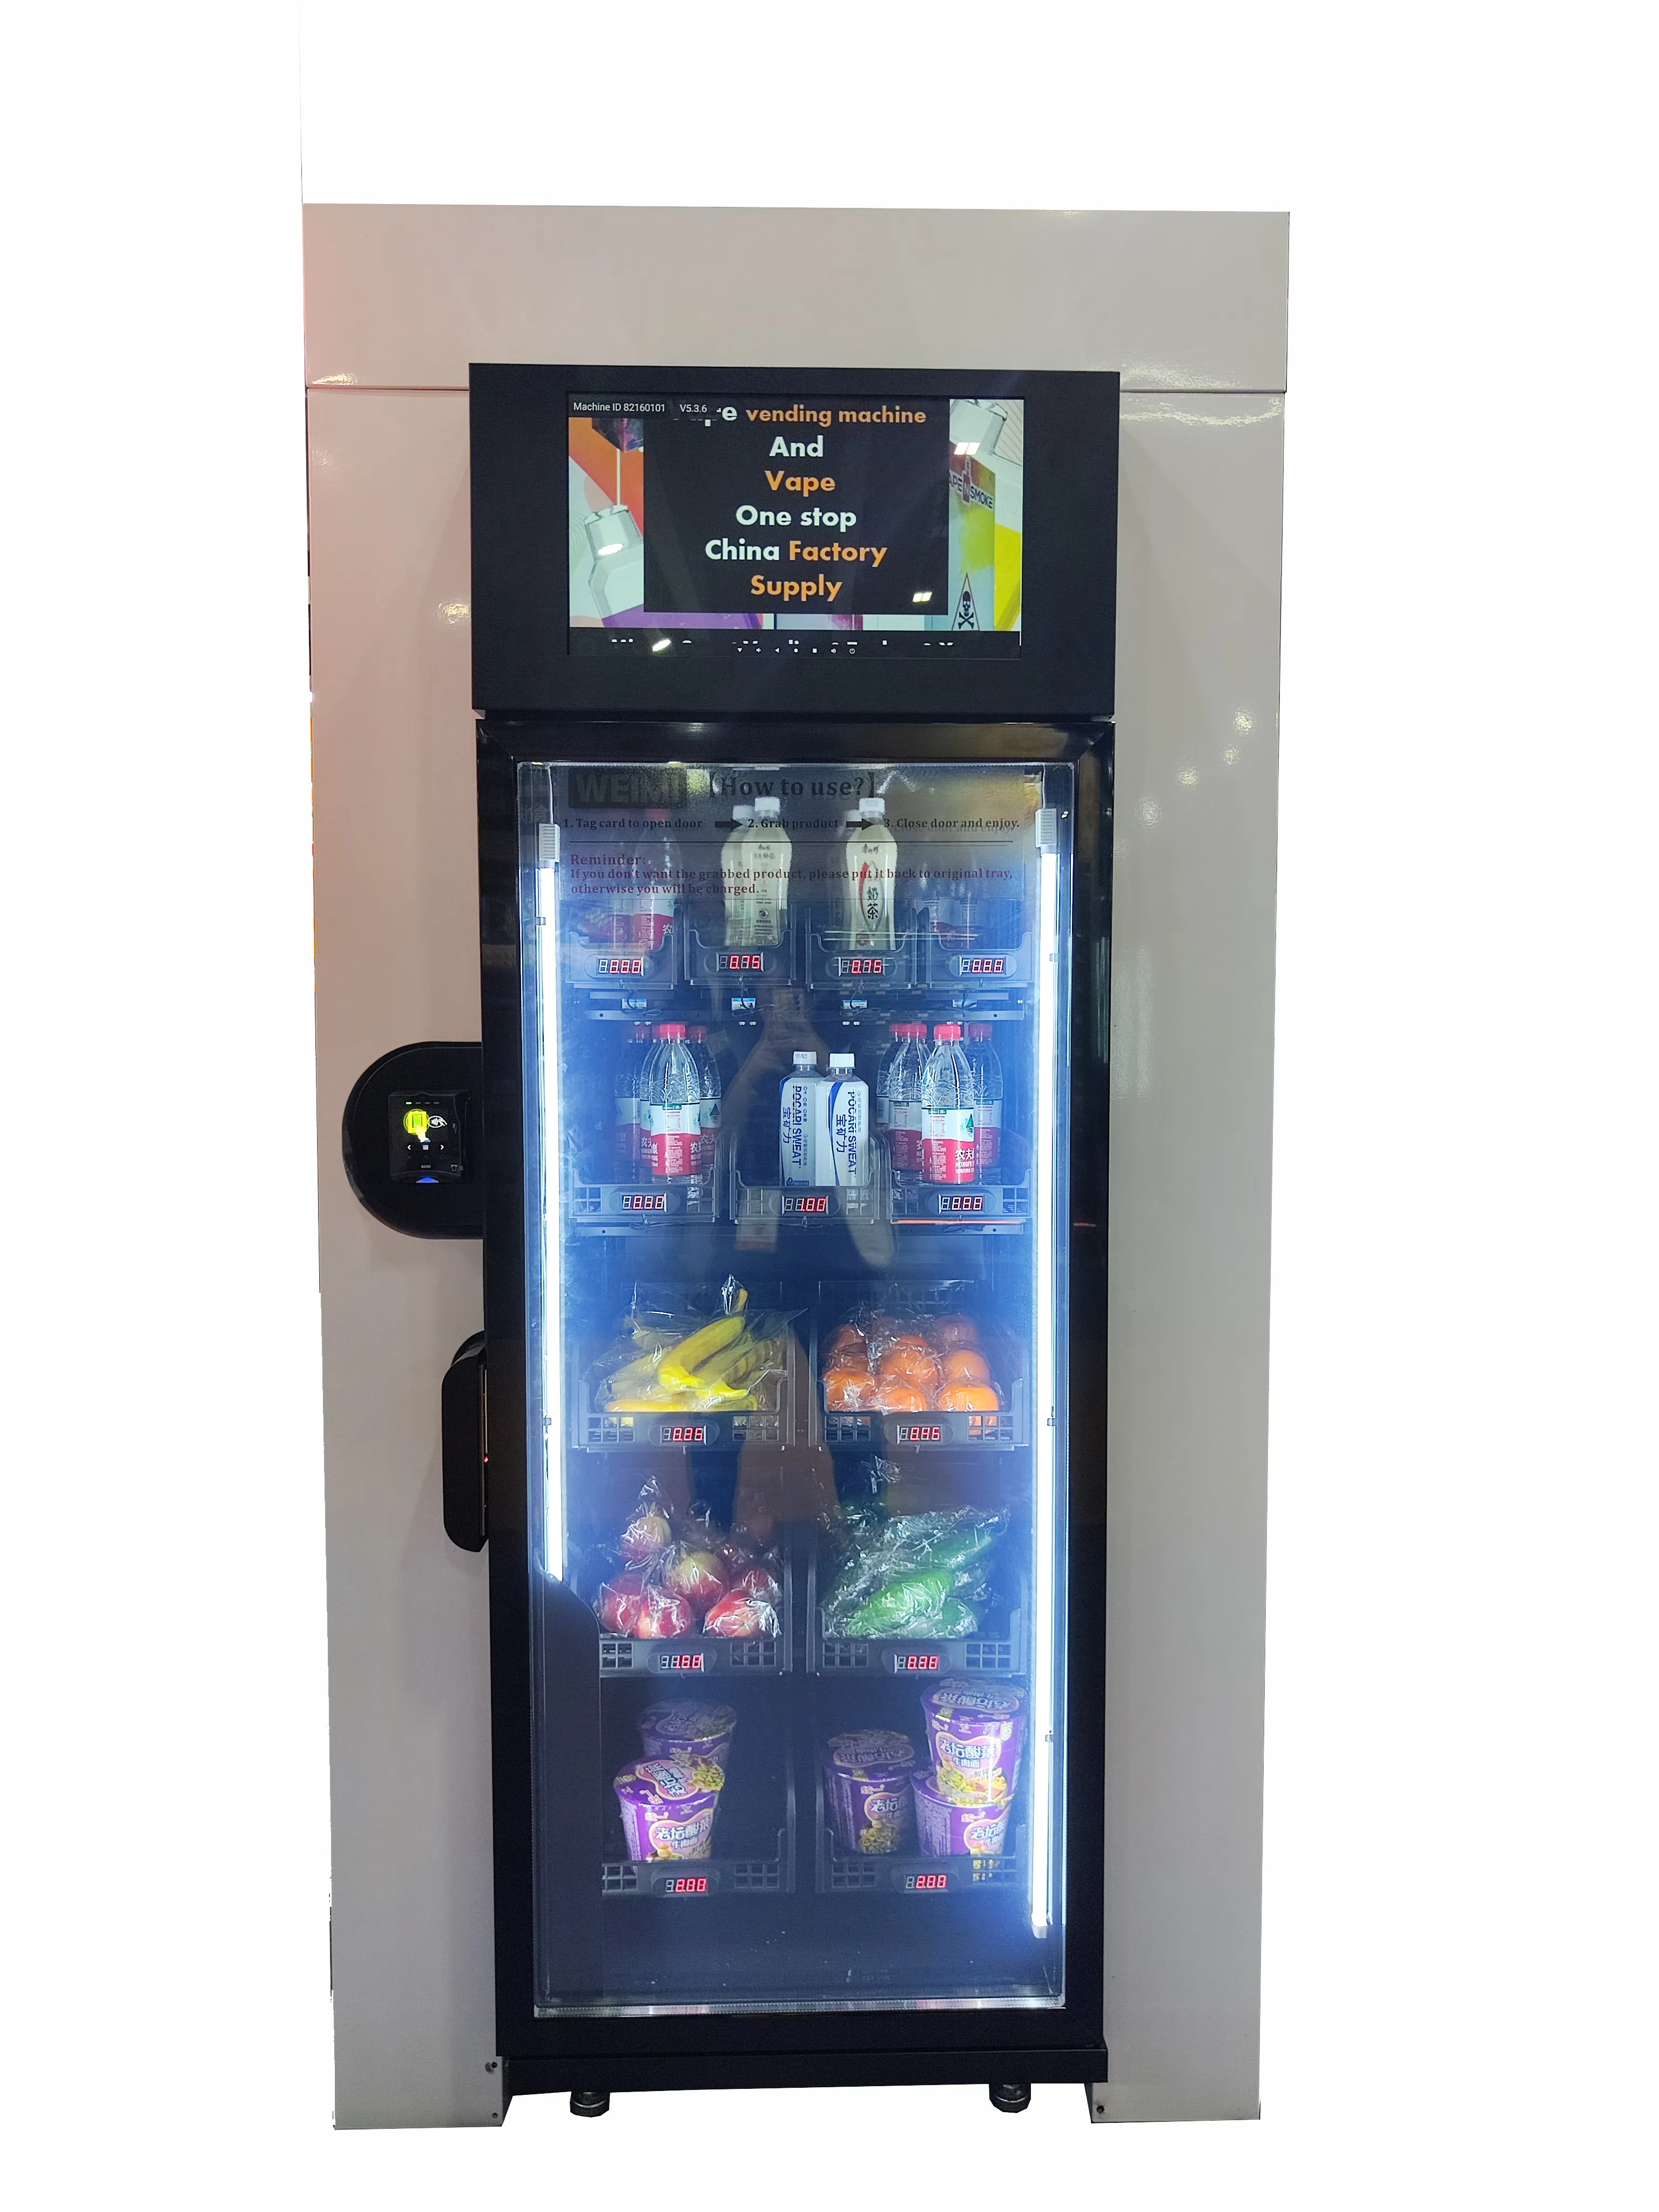 Weimi Vending Machine Company at Asia Vending Expo